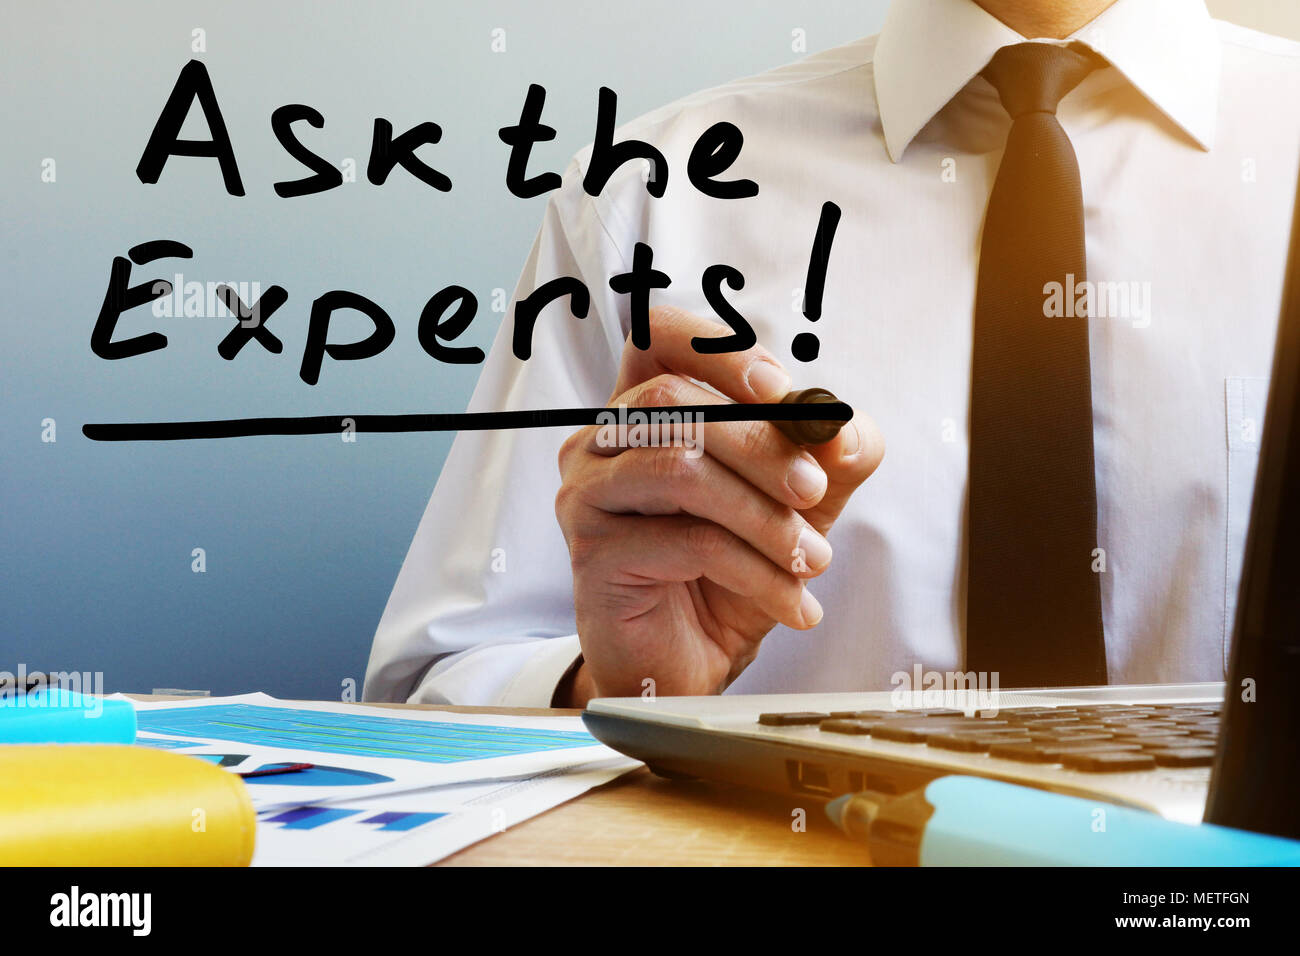 Ask the experts. Man sitting at the table. Stock Photo